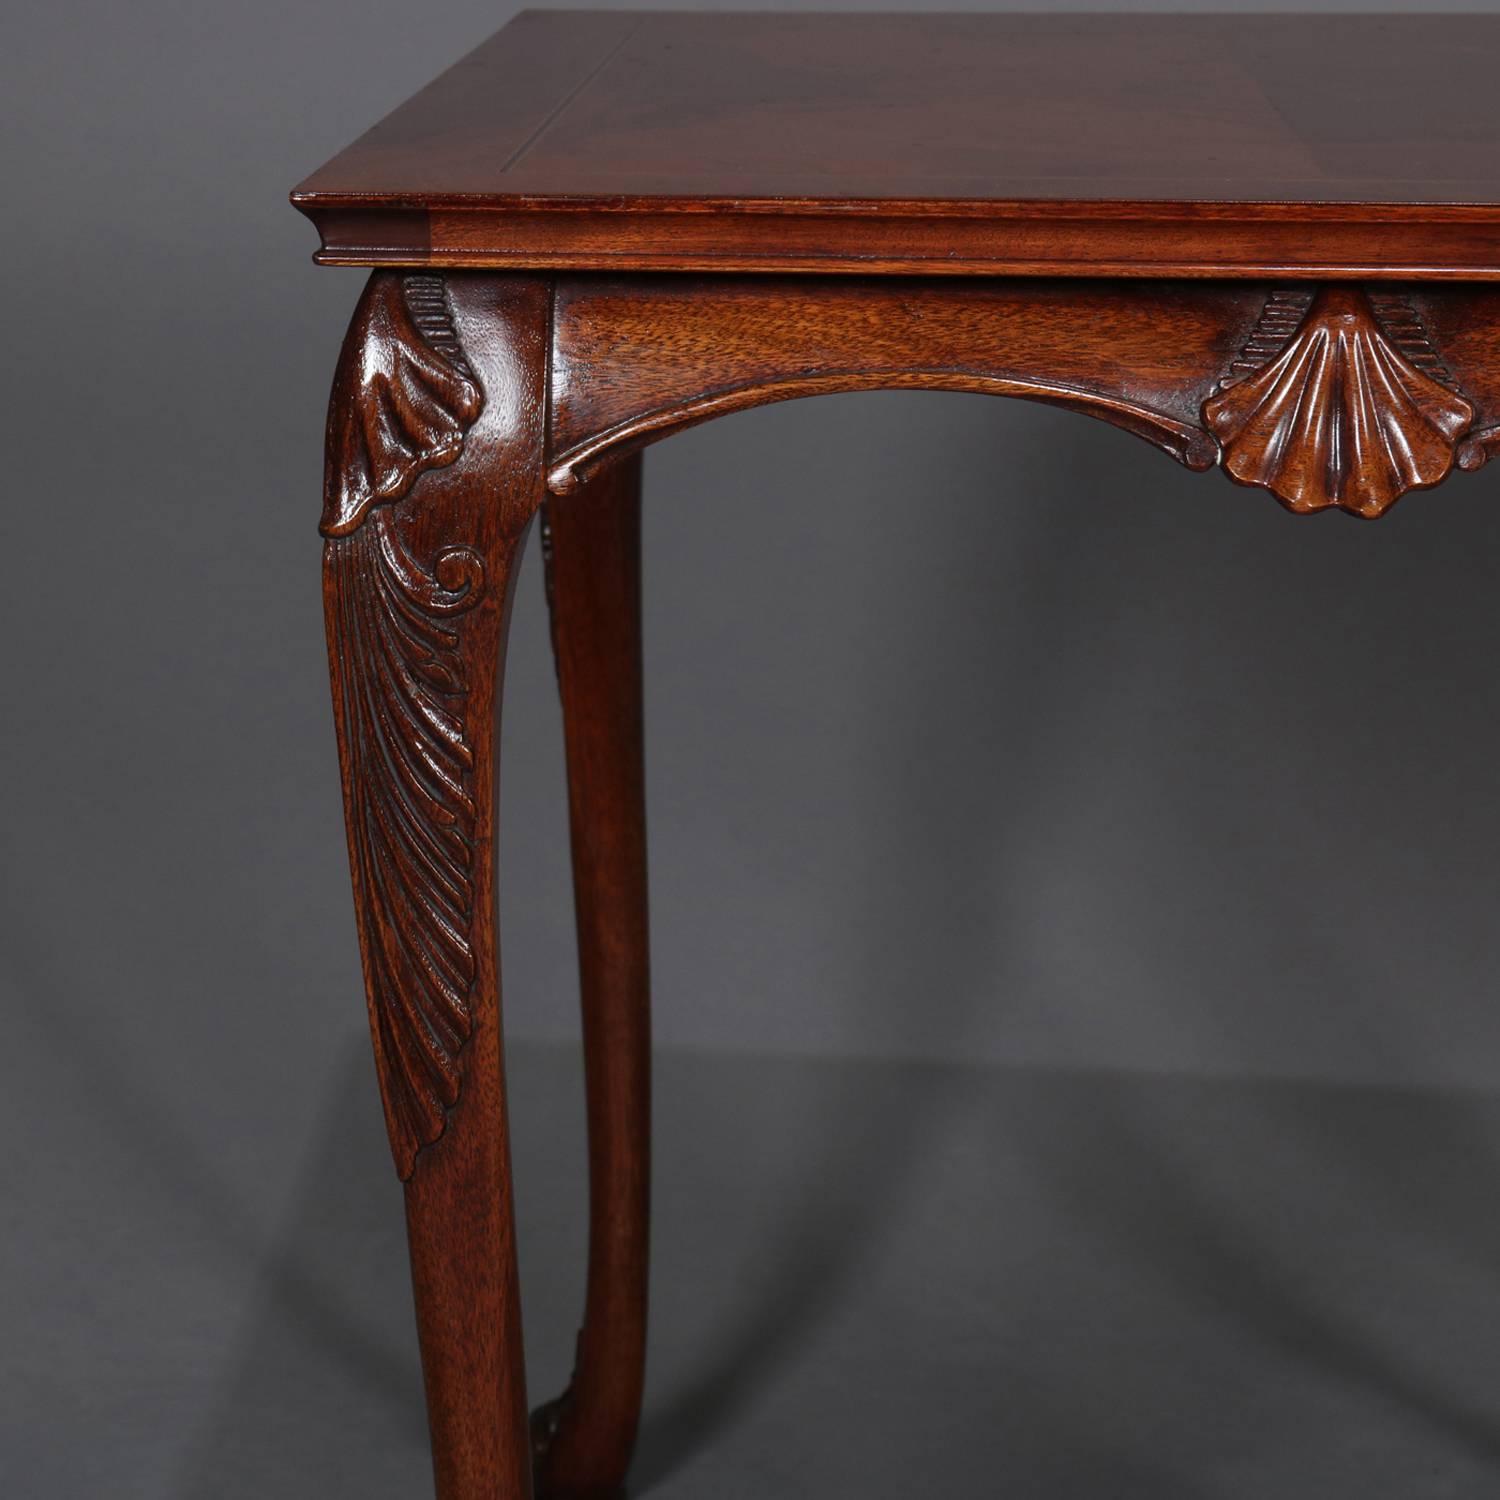 20th Century Pair of Carved and Bookmatched Flame Mahogany Baker School End Tables circa 1930